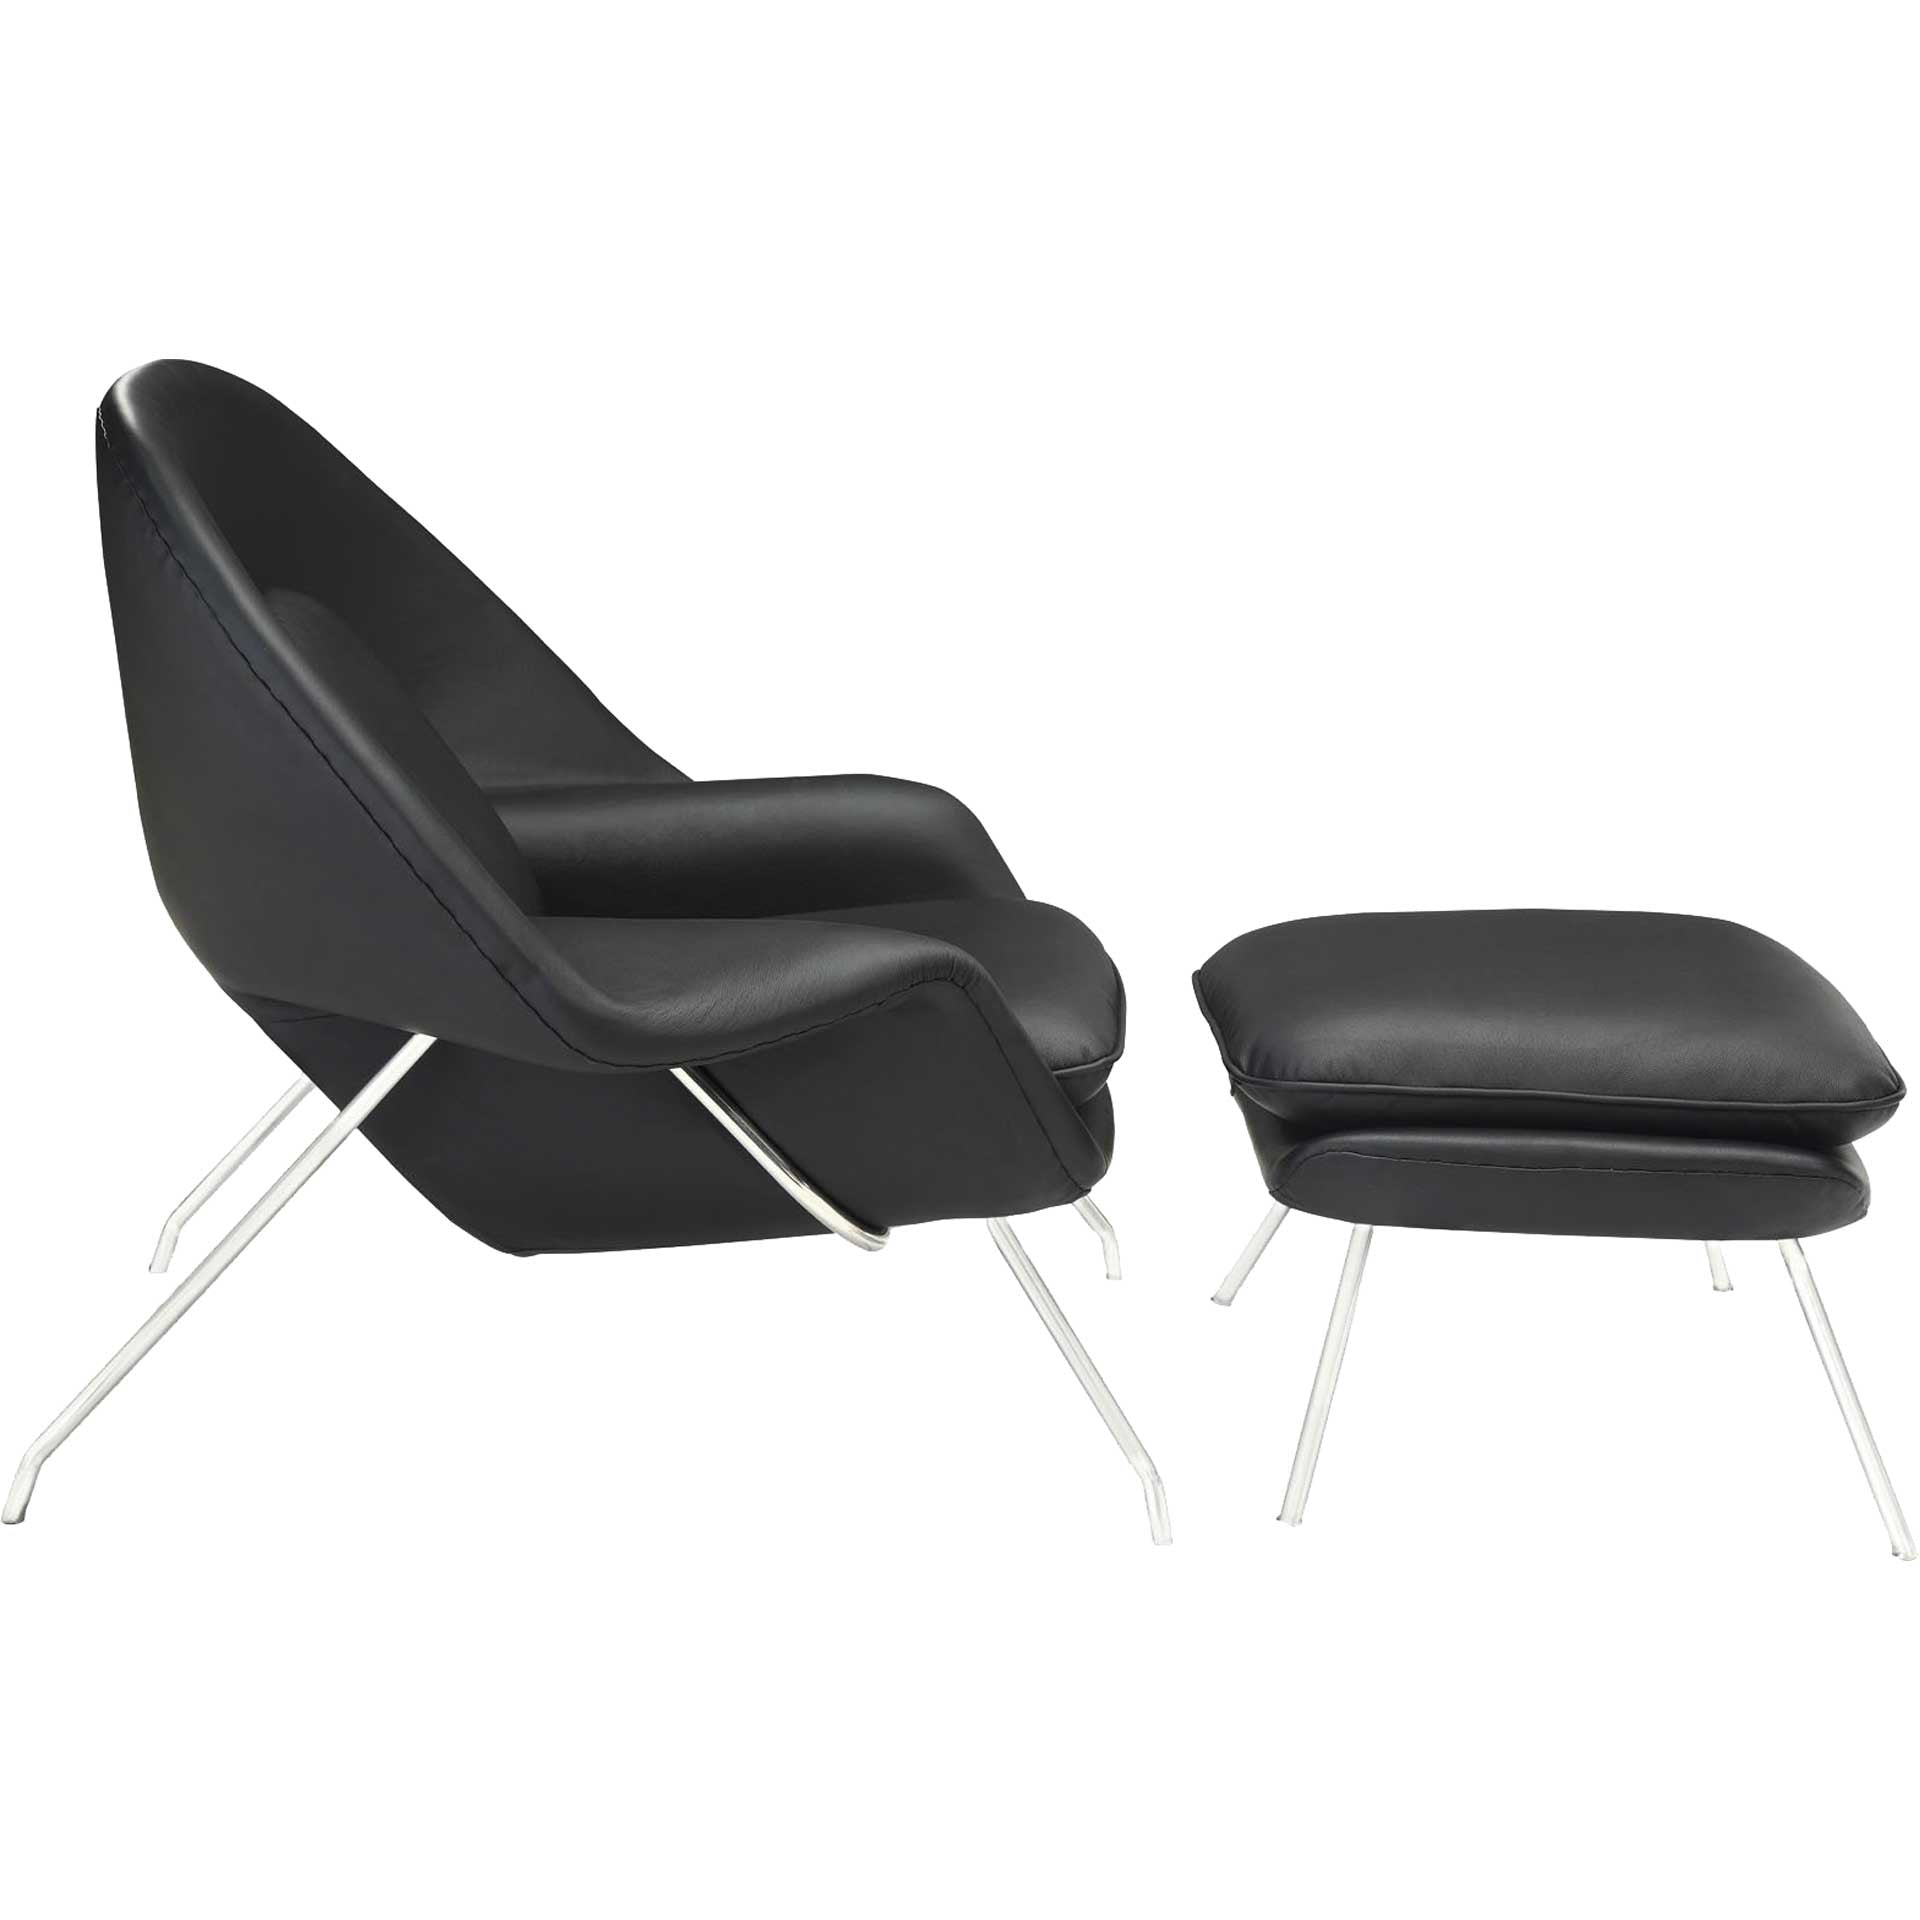 Wander Leather Lounge Chair Black